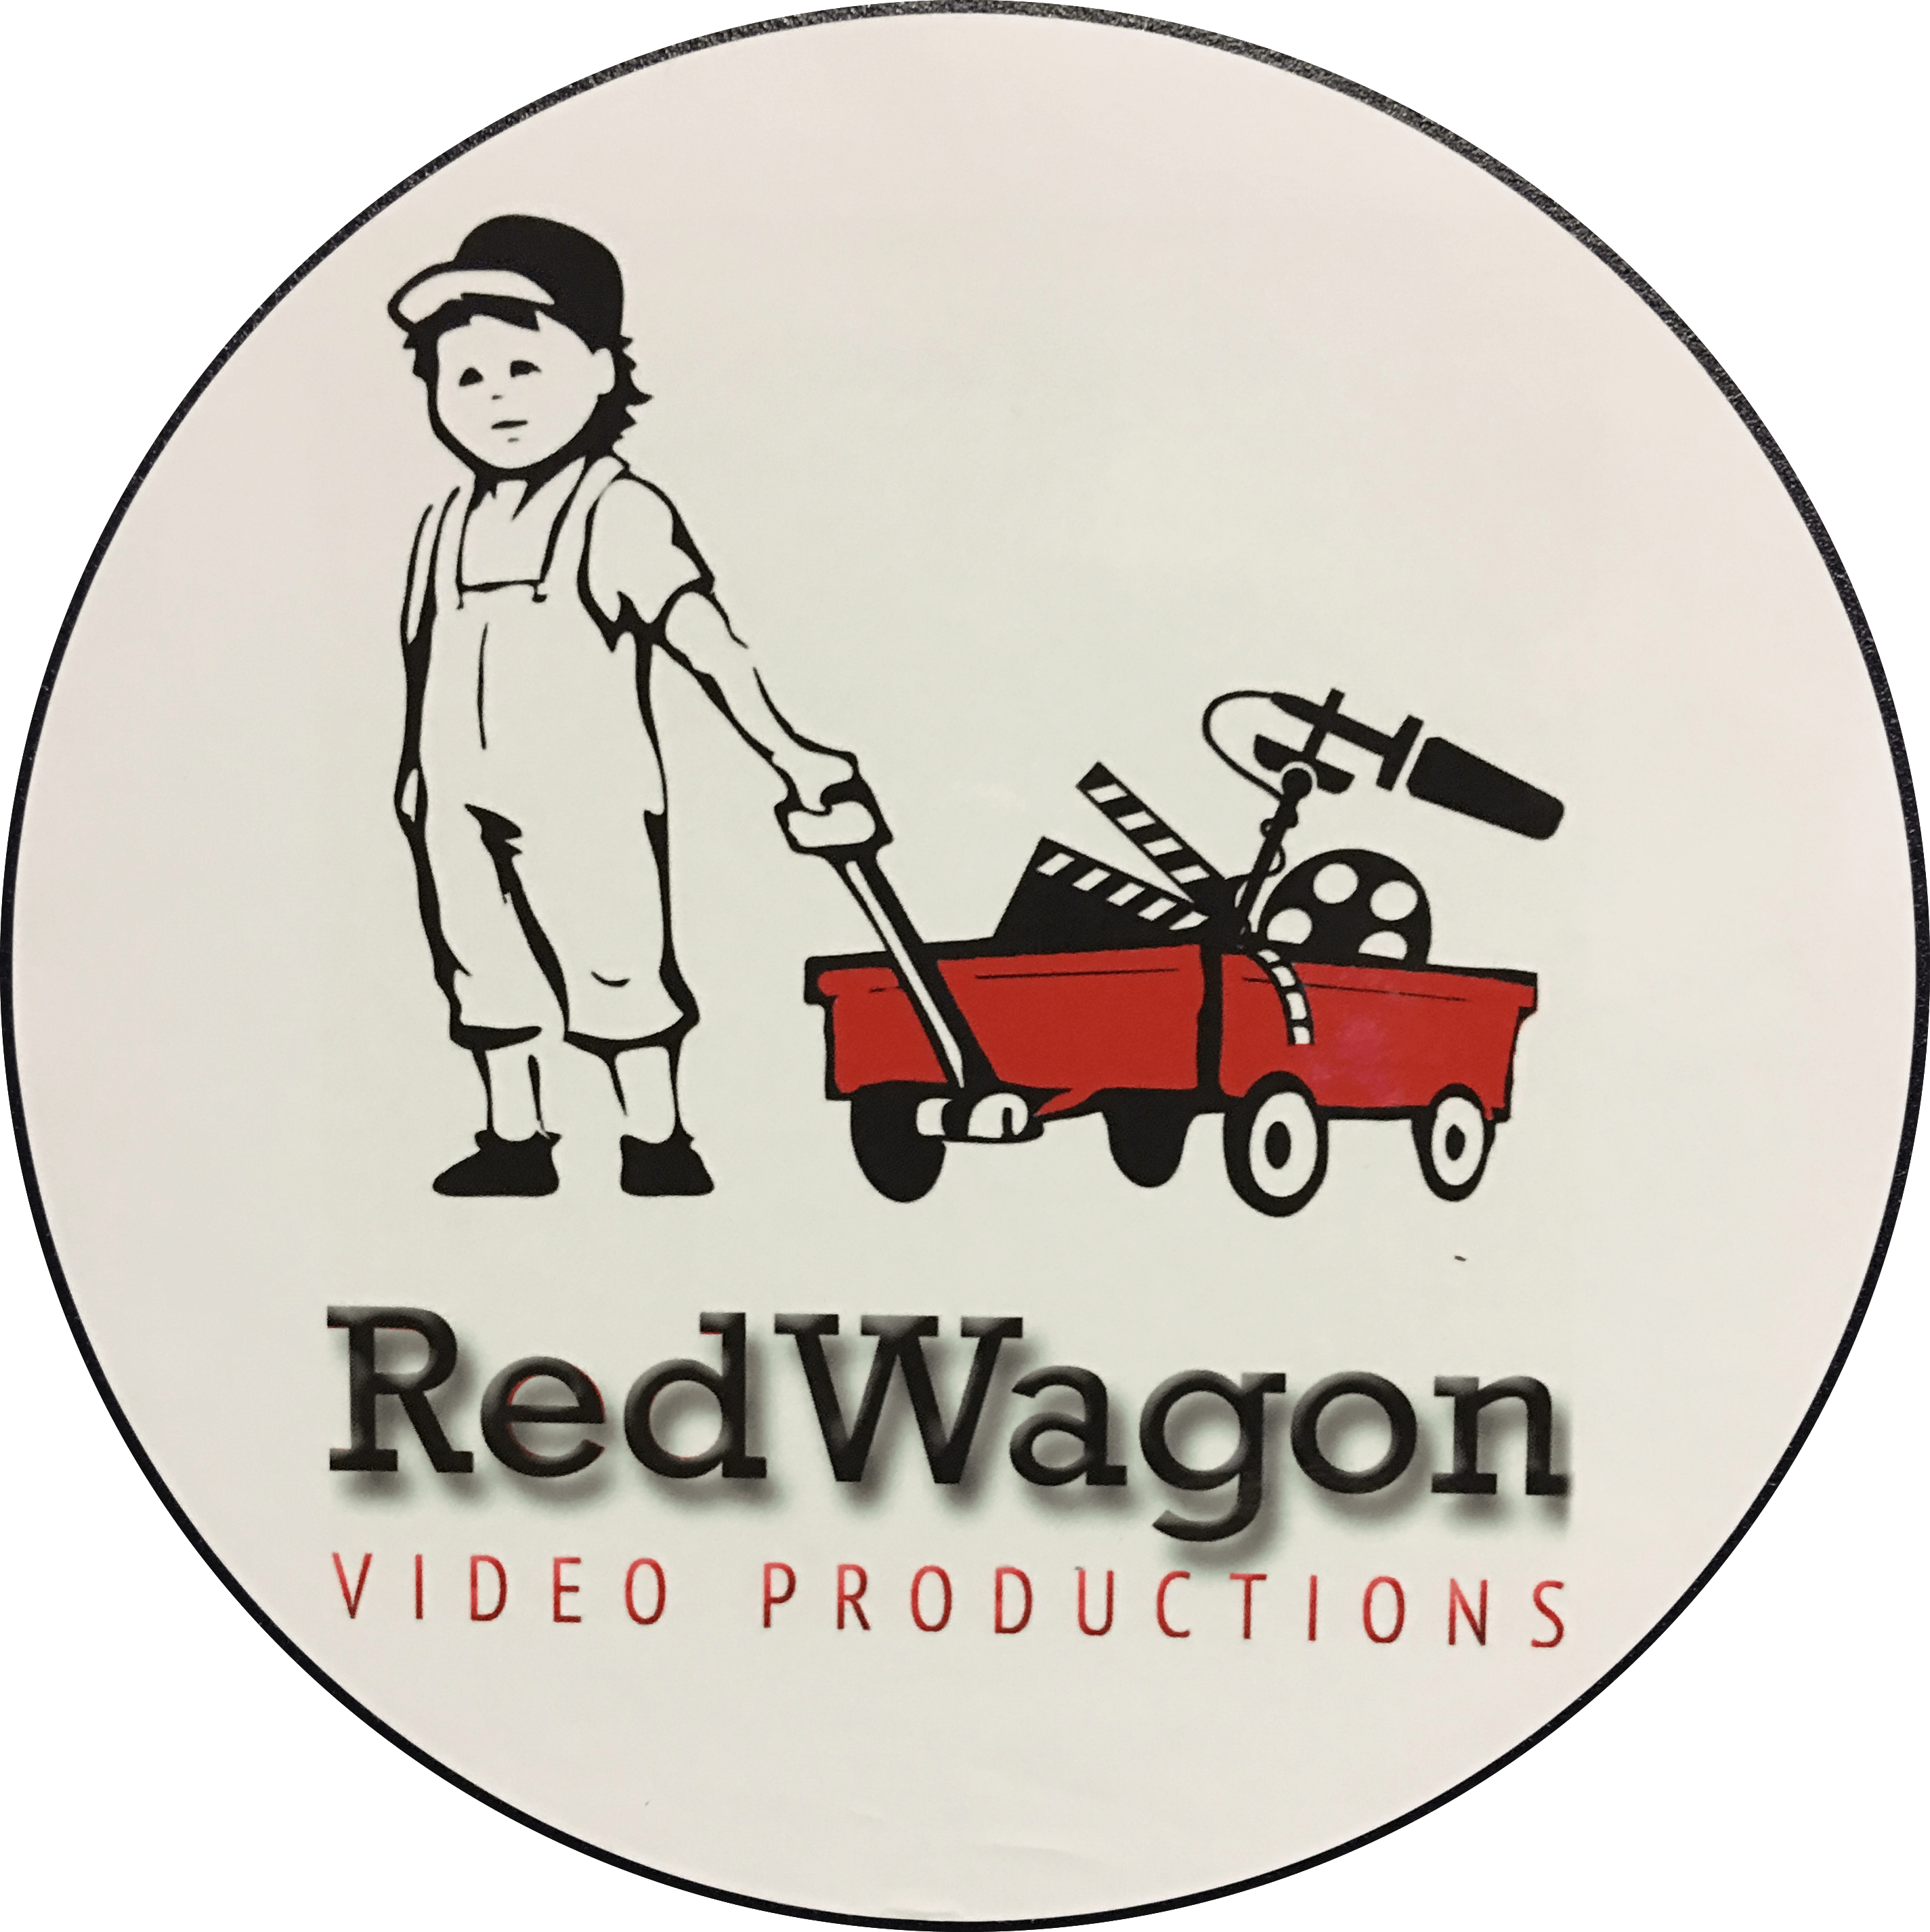 Red Wagon Video Productions